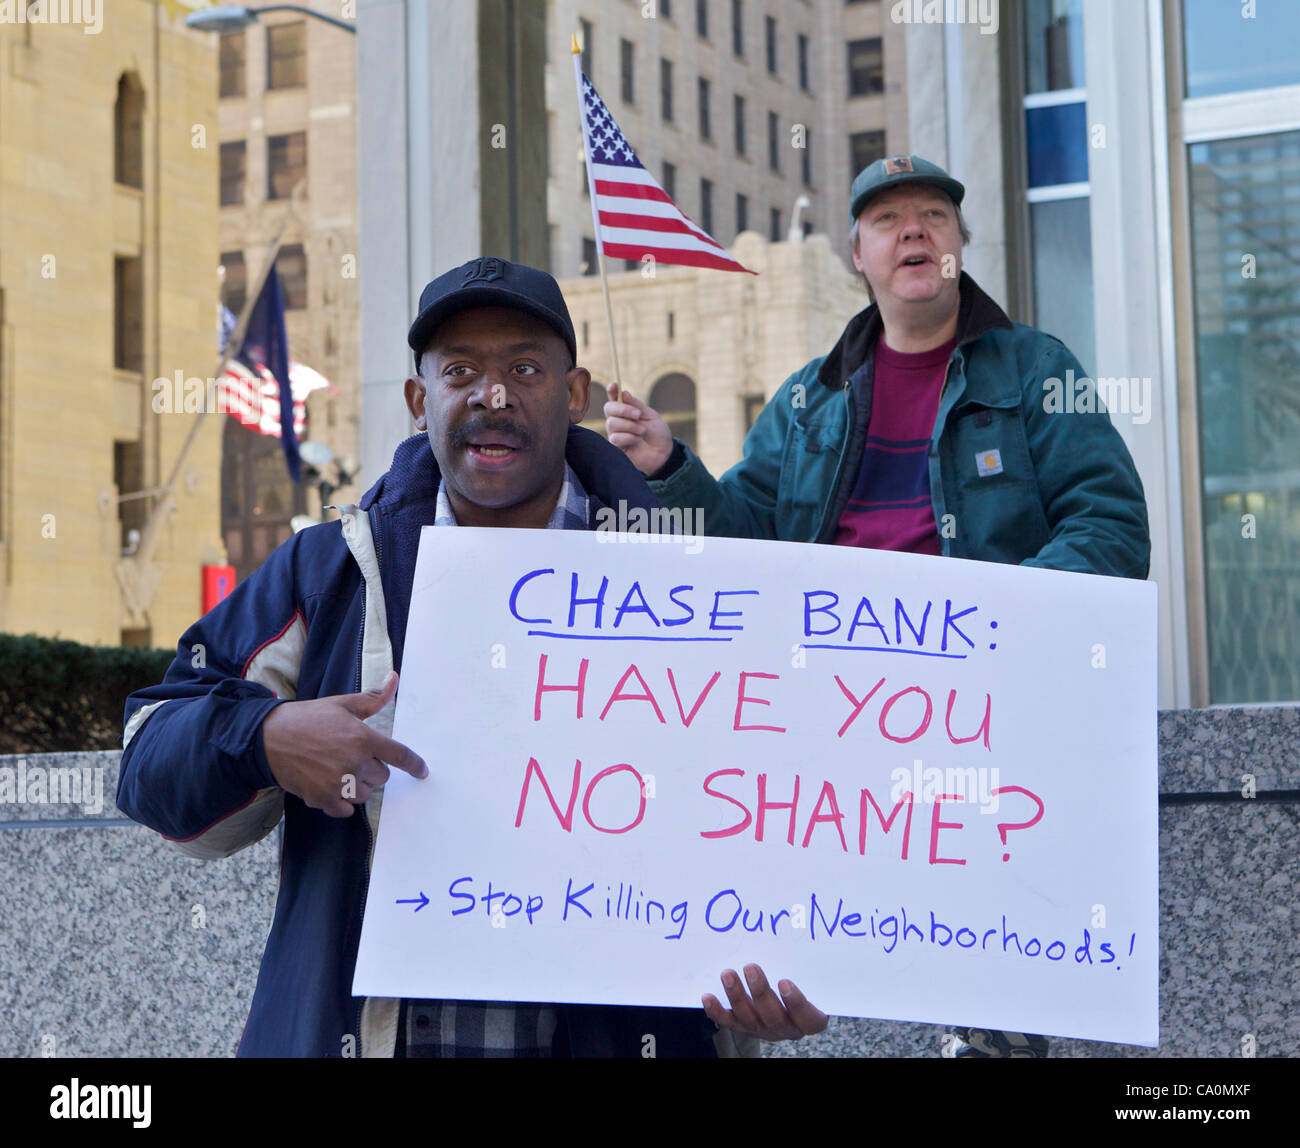 Detroit, USA. 13 Mar, 2012. A protester holds a sign at a rally against the foreclosure polices of Chase Bank in Detroit, Michigan. About 200 people marched from the statue of the Spirit of Detroit to the bank. Stock Photo